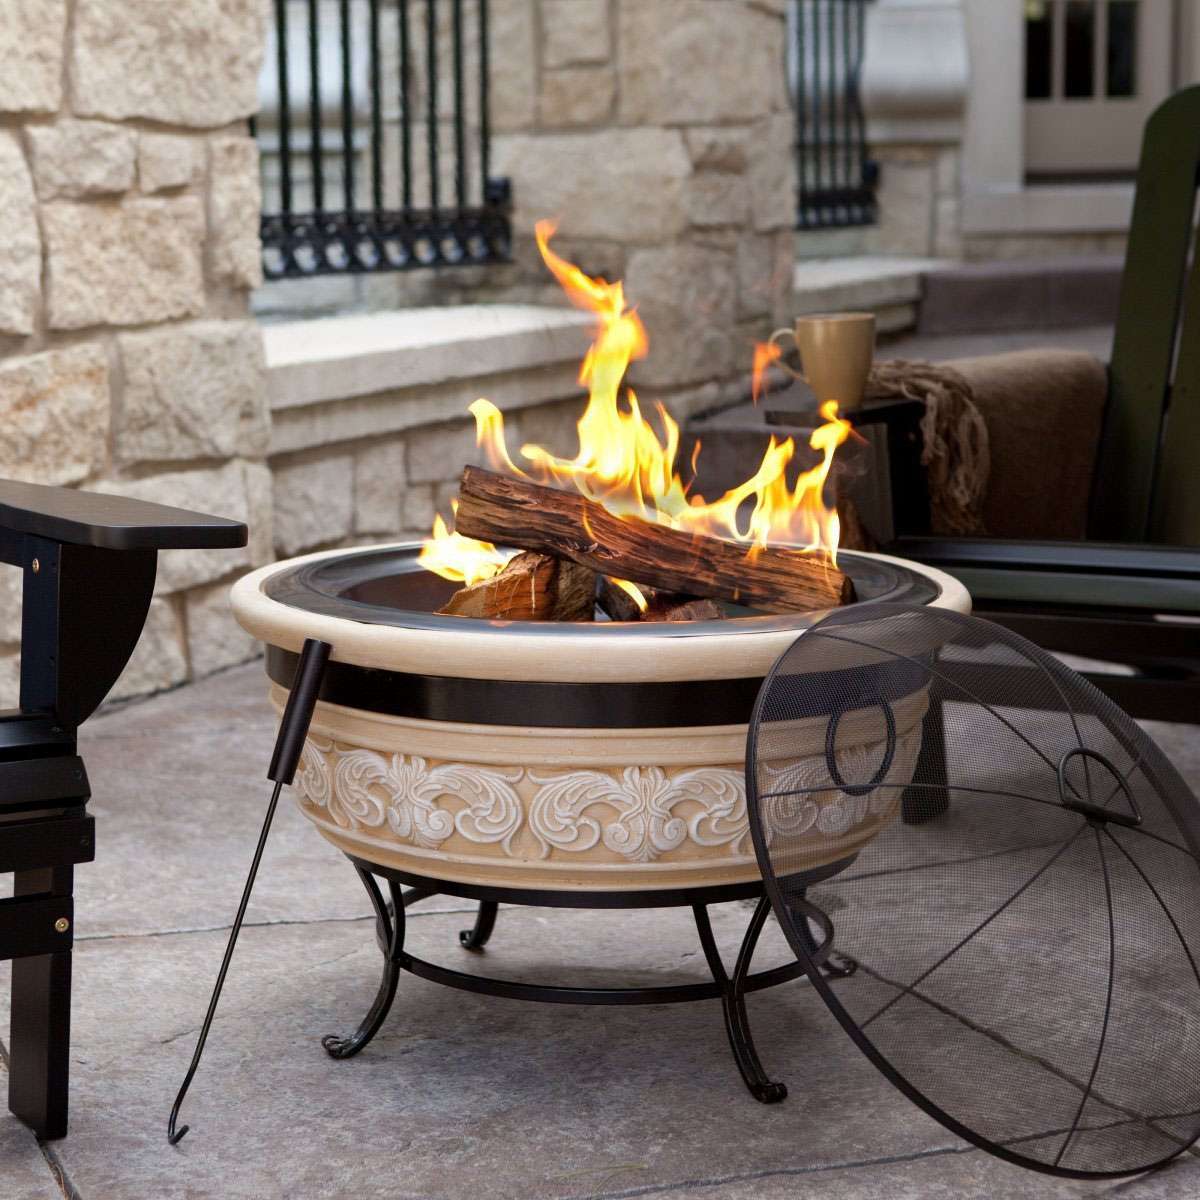 Portable outdoor fire pit: Ultimate Choice for Camping and ...